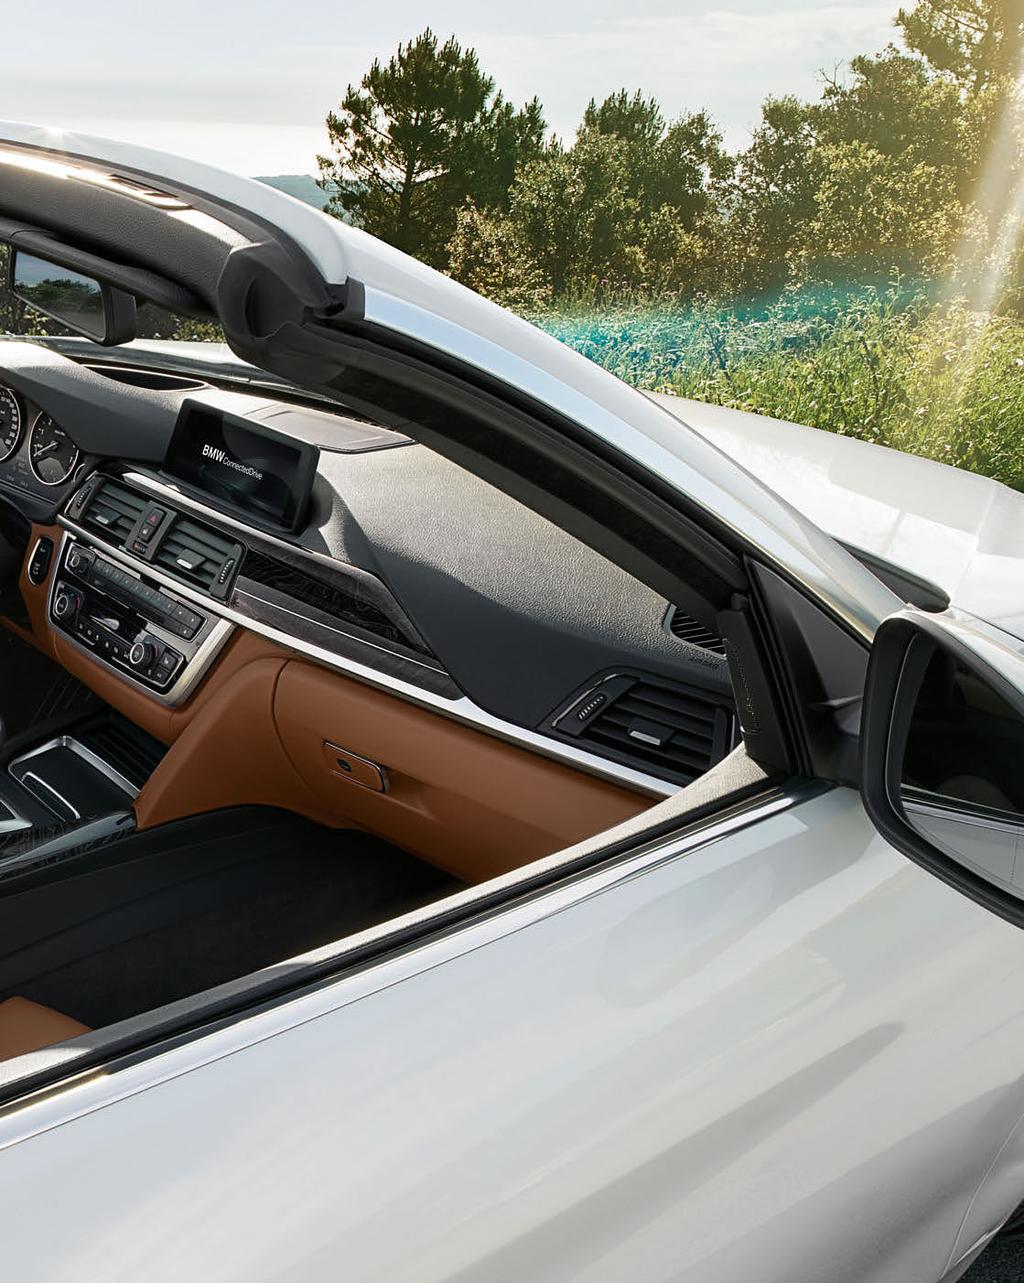 materials, expert craftsmanship and individual equipment options: with unique details such as seatbelts integrated into the seats.